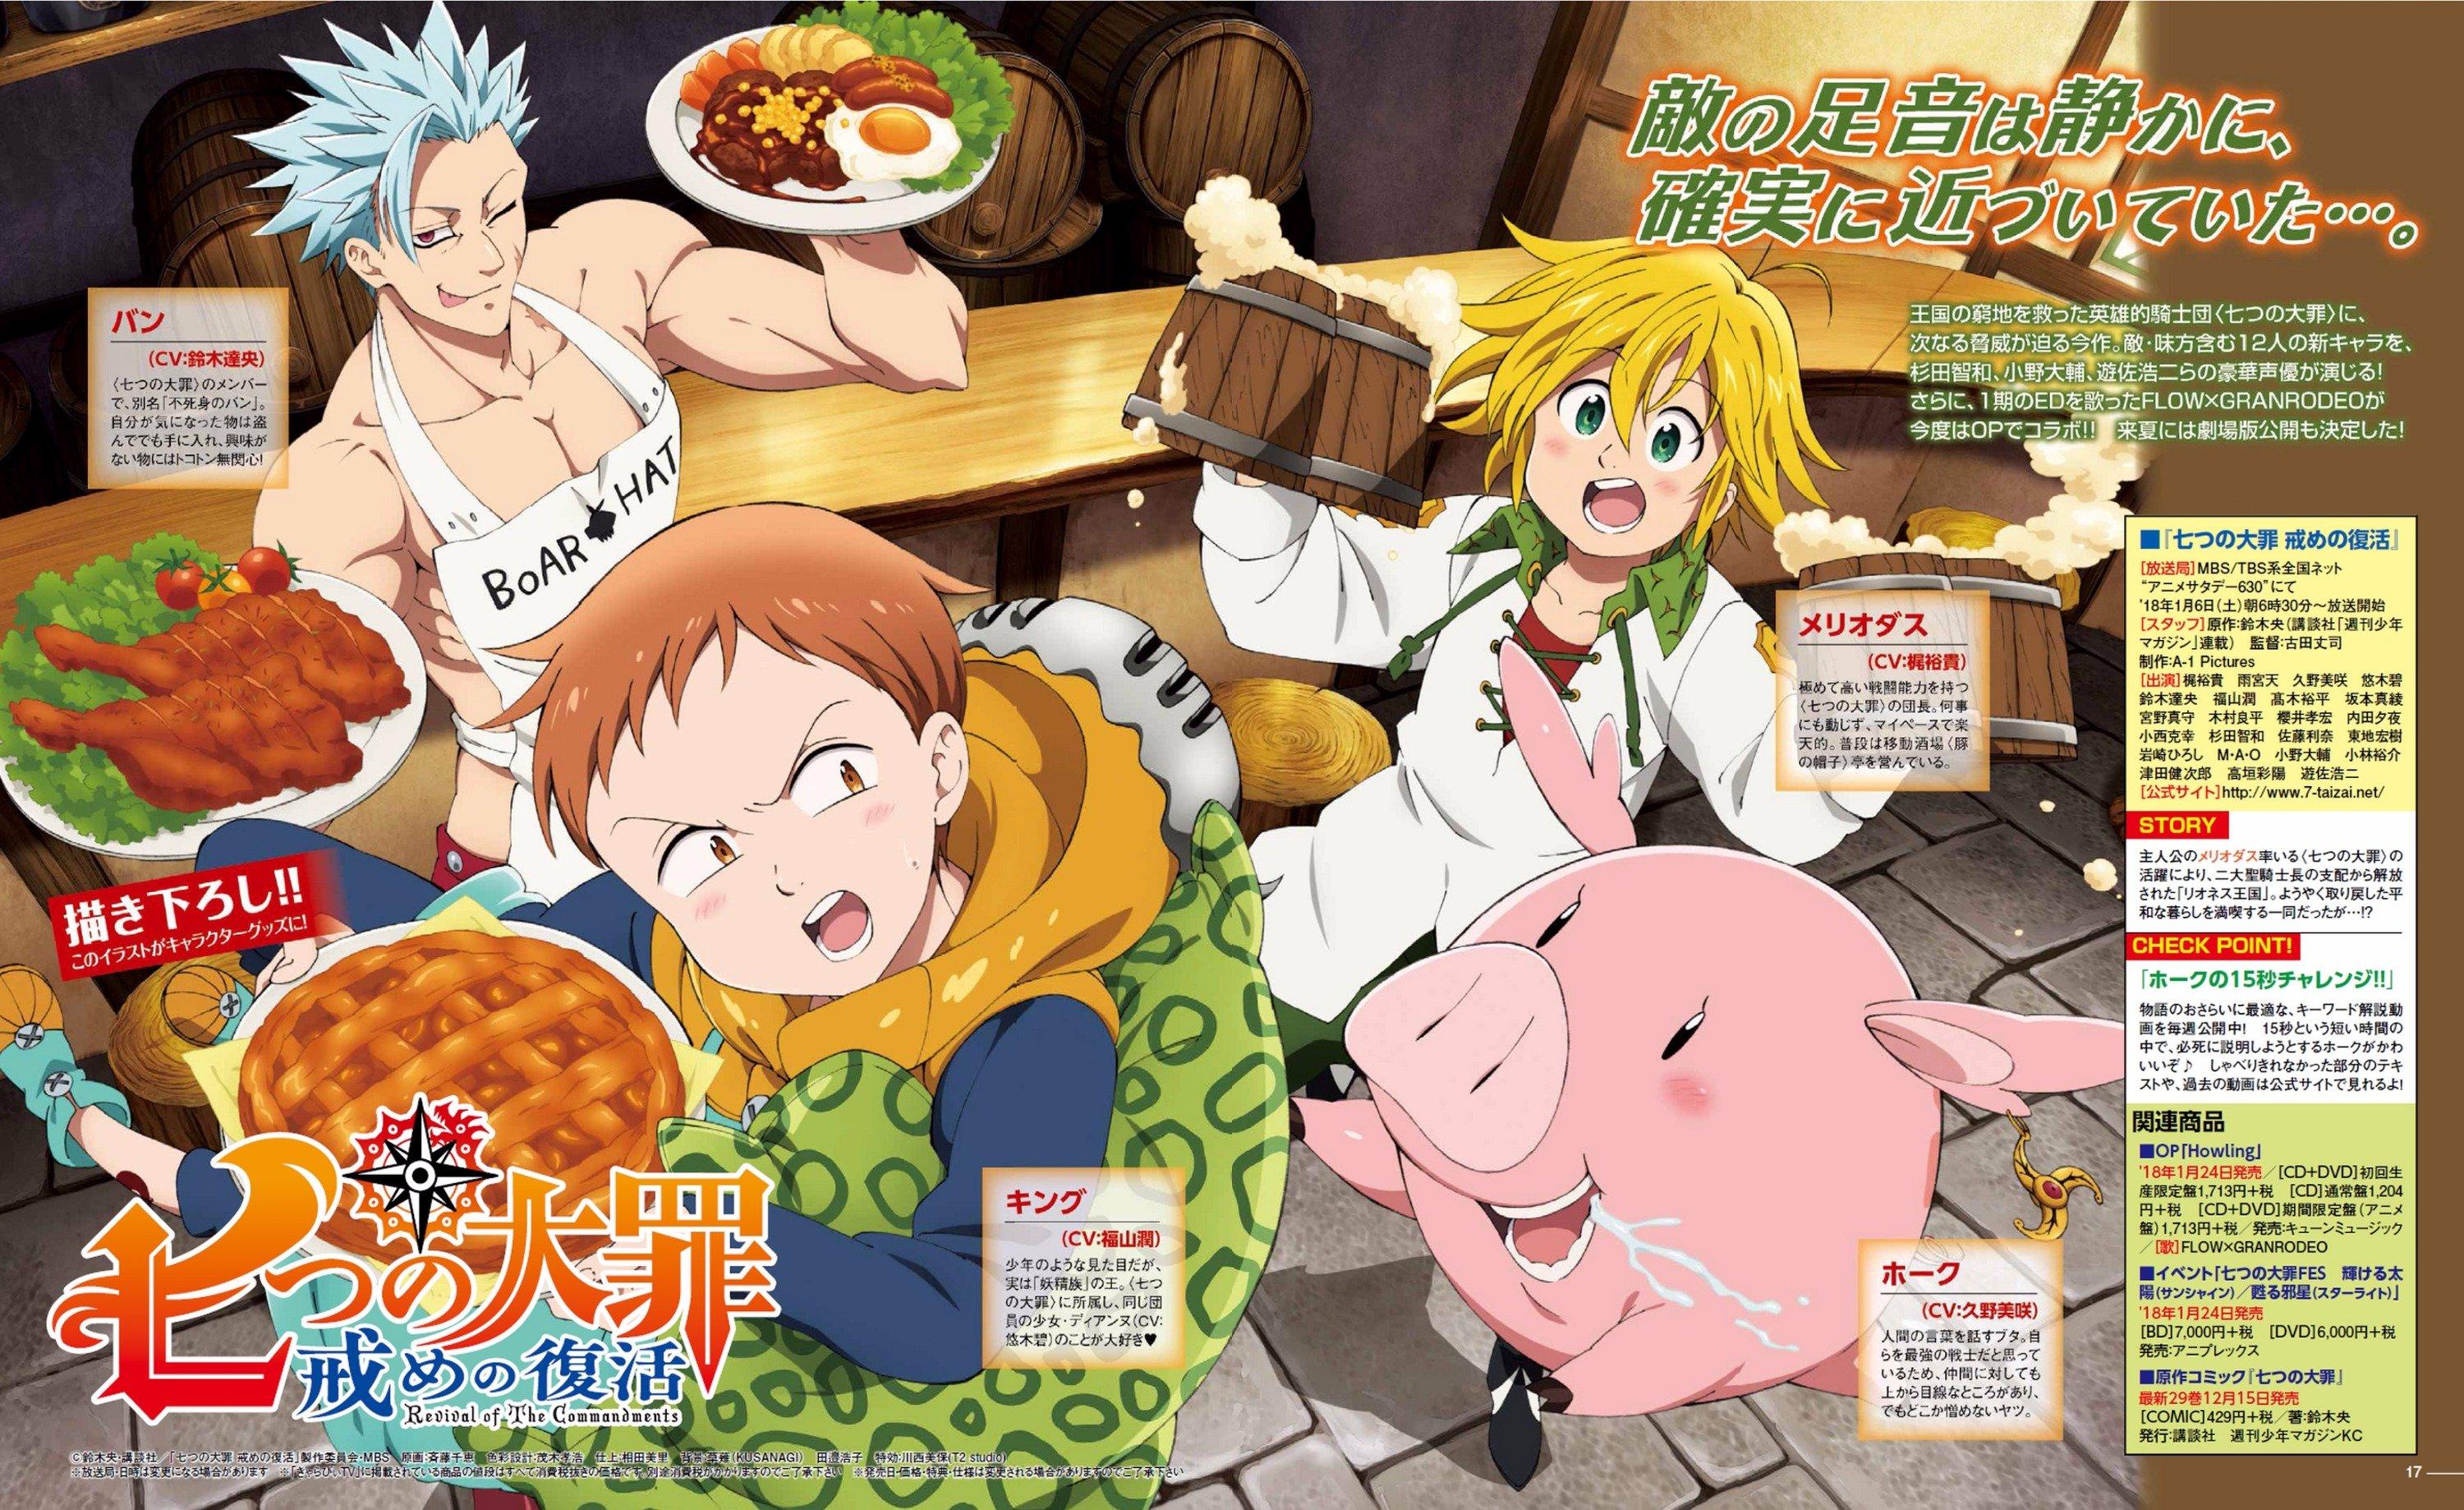 The Seven Deadly Sins Revival Of The Commandments New Wallpaper, The Seven Deadly Sins Revival Of The Commandments, Anime